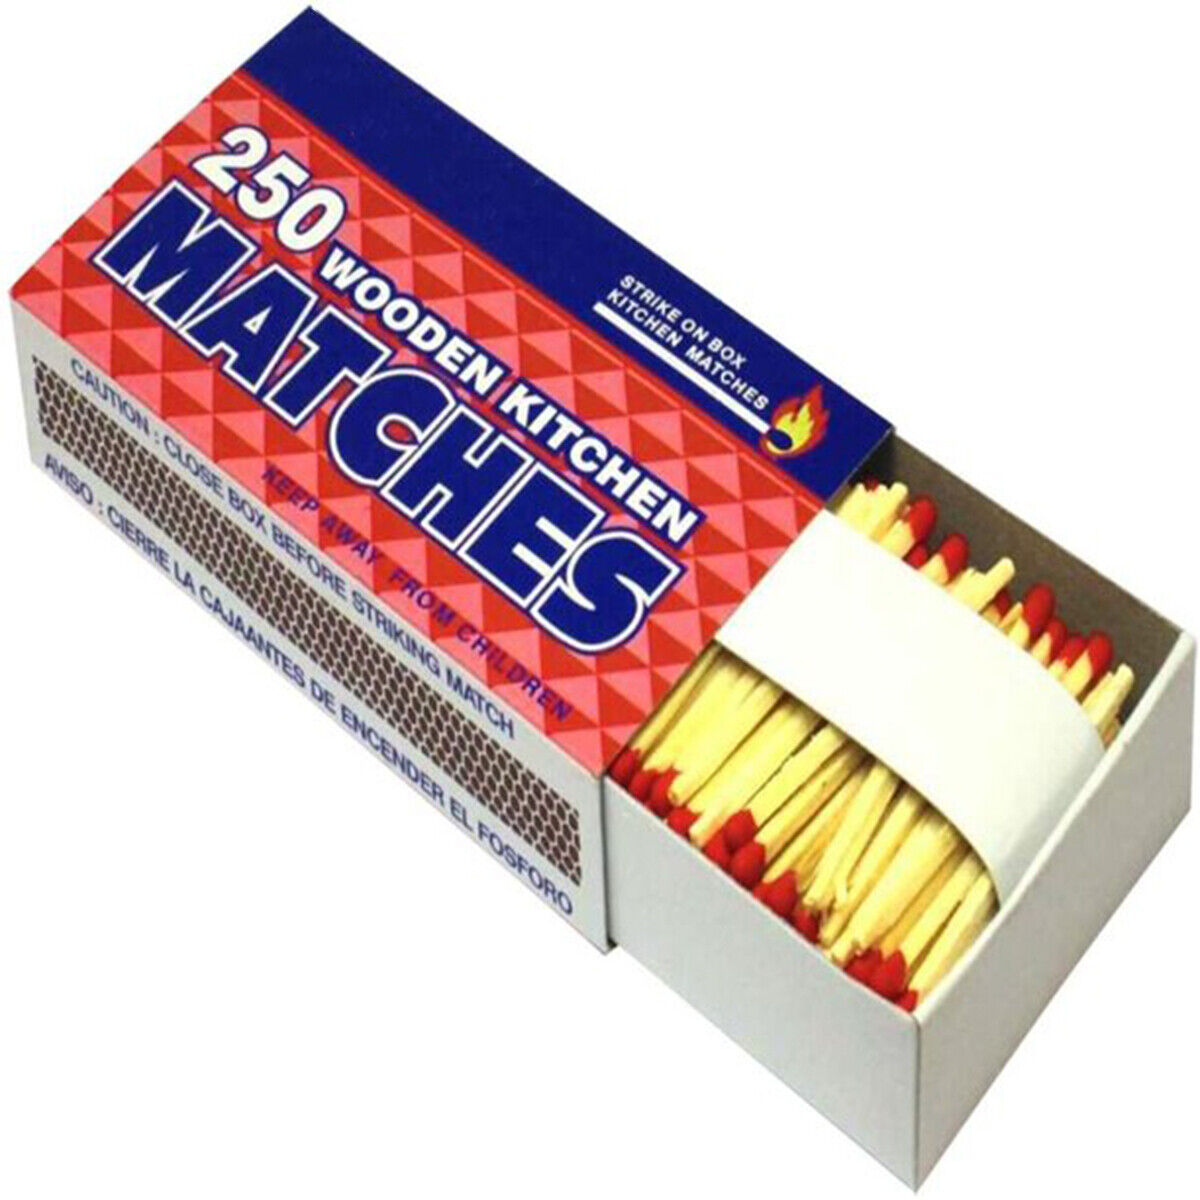 Flare Wooden Matches - 500ct